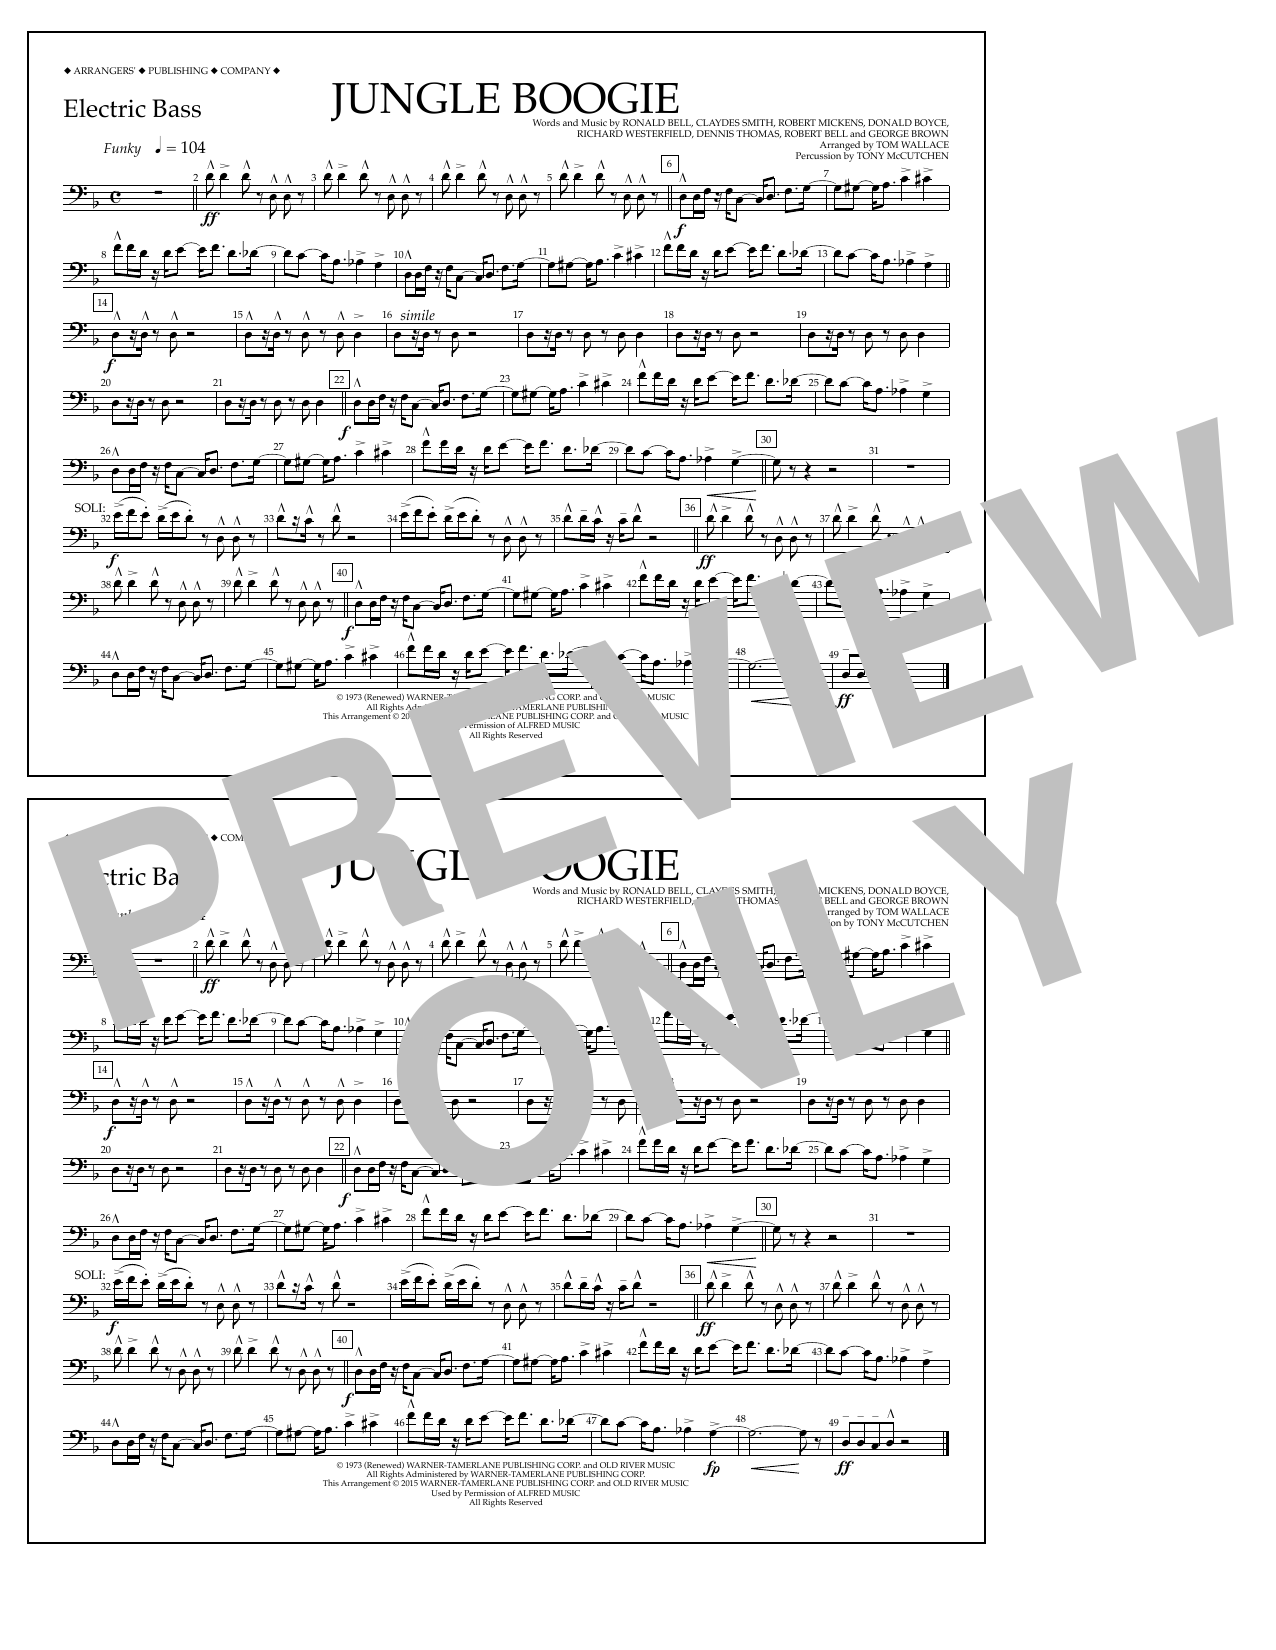 Download Tom Wallace Jungle Boogie - Electric Bass Sheet Music